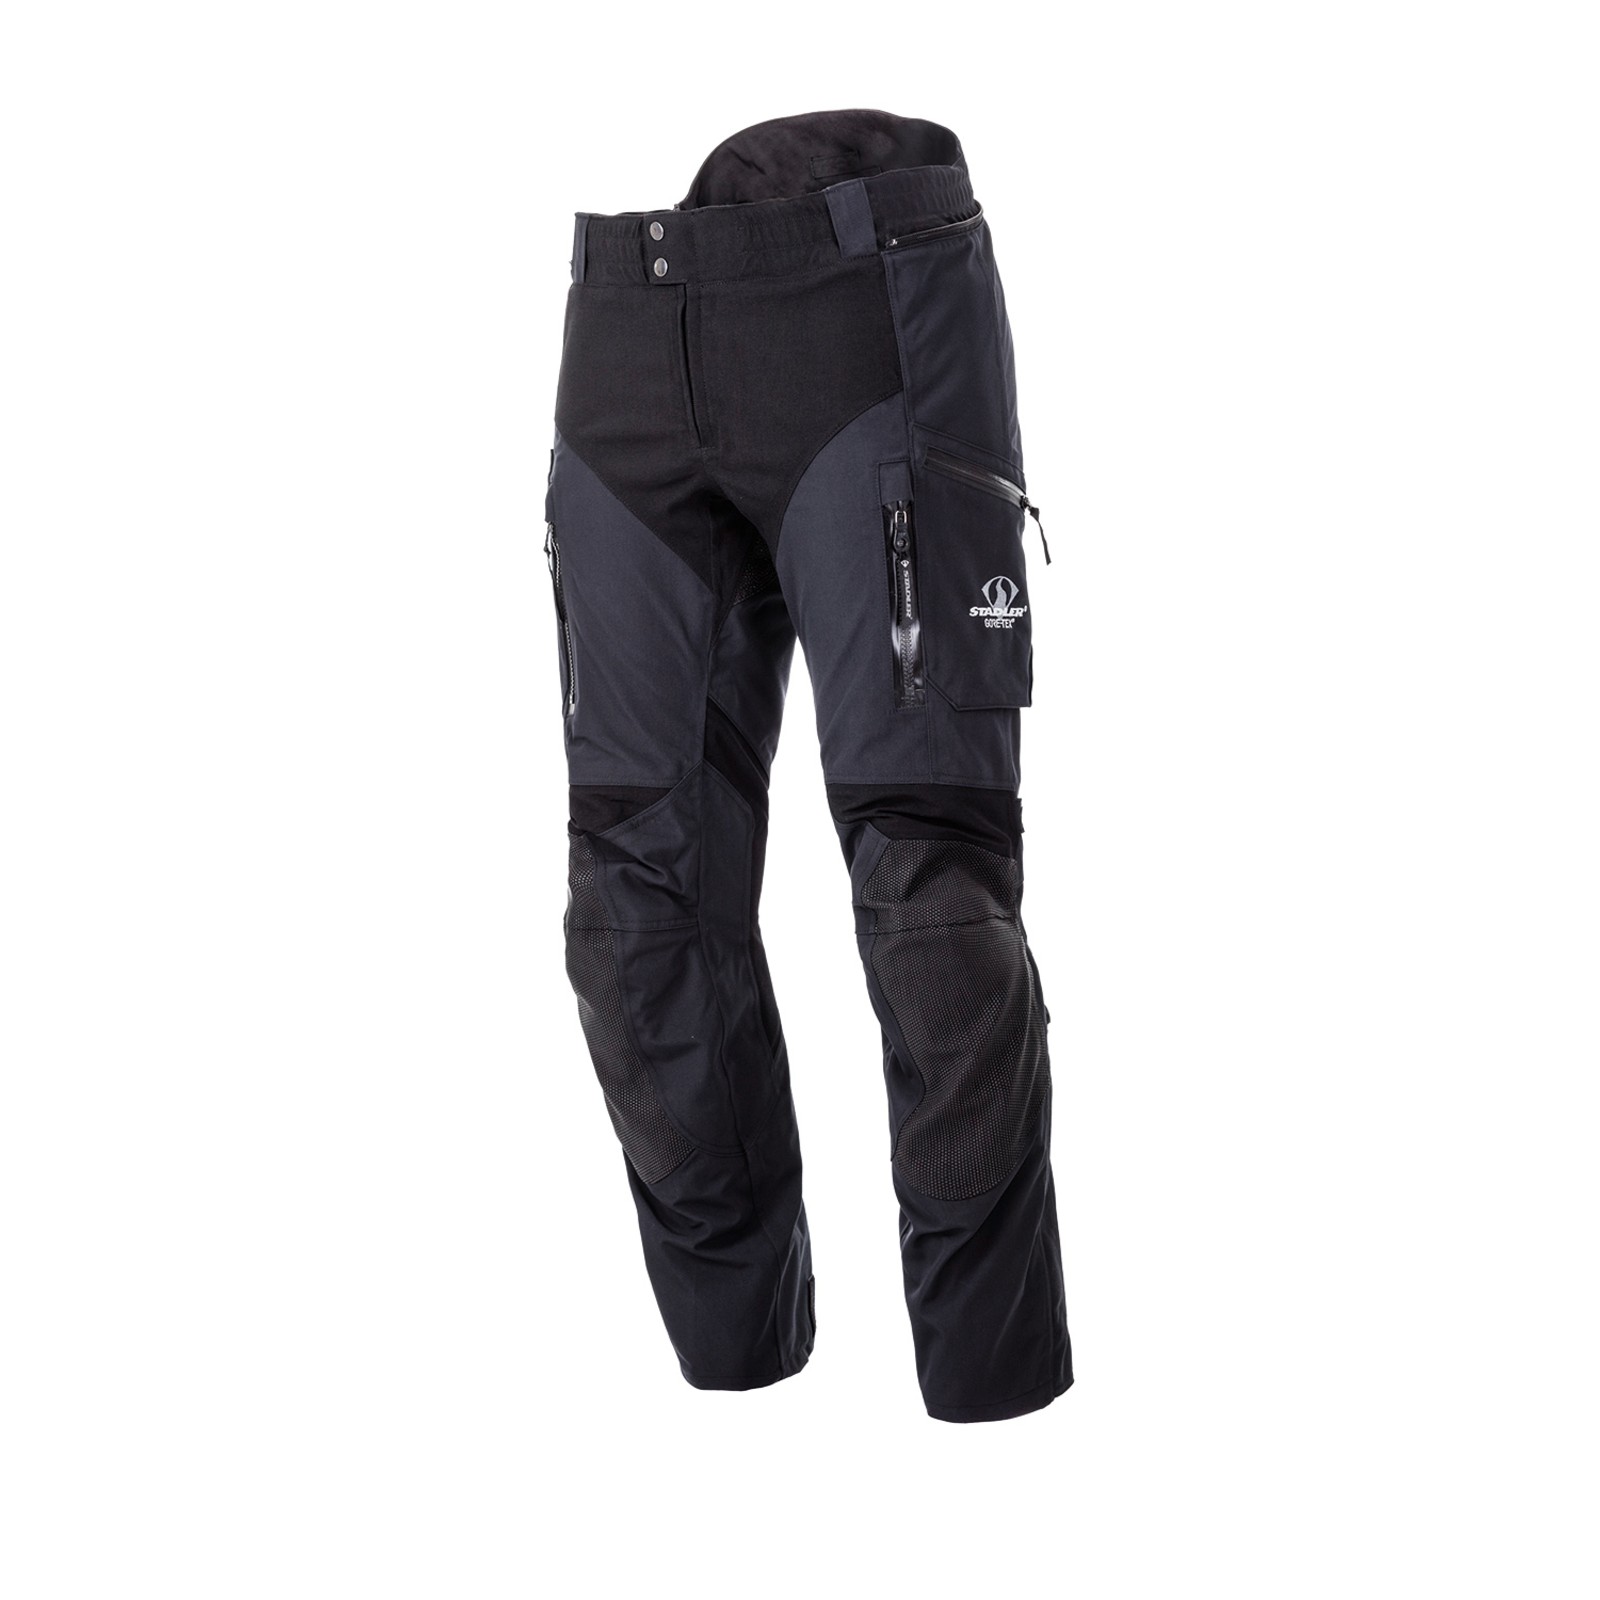 4All Pro Gore-Tex Trousers